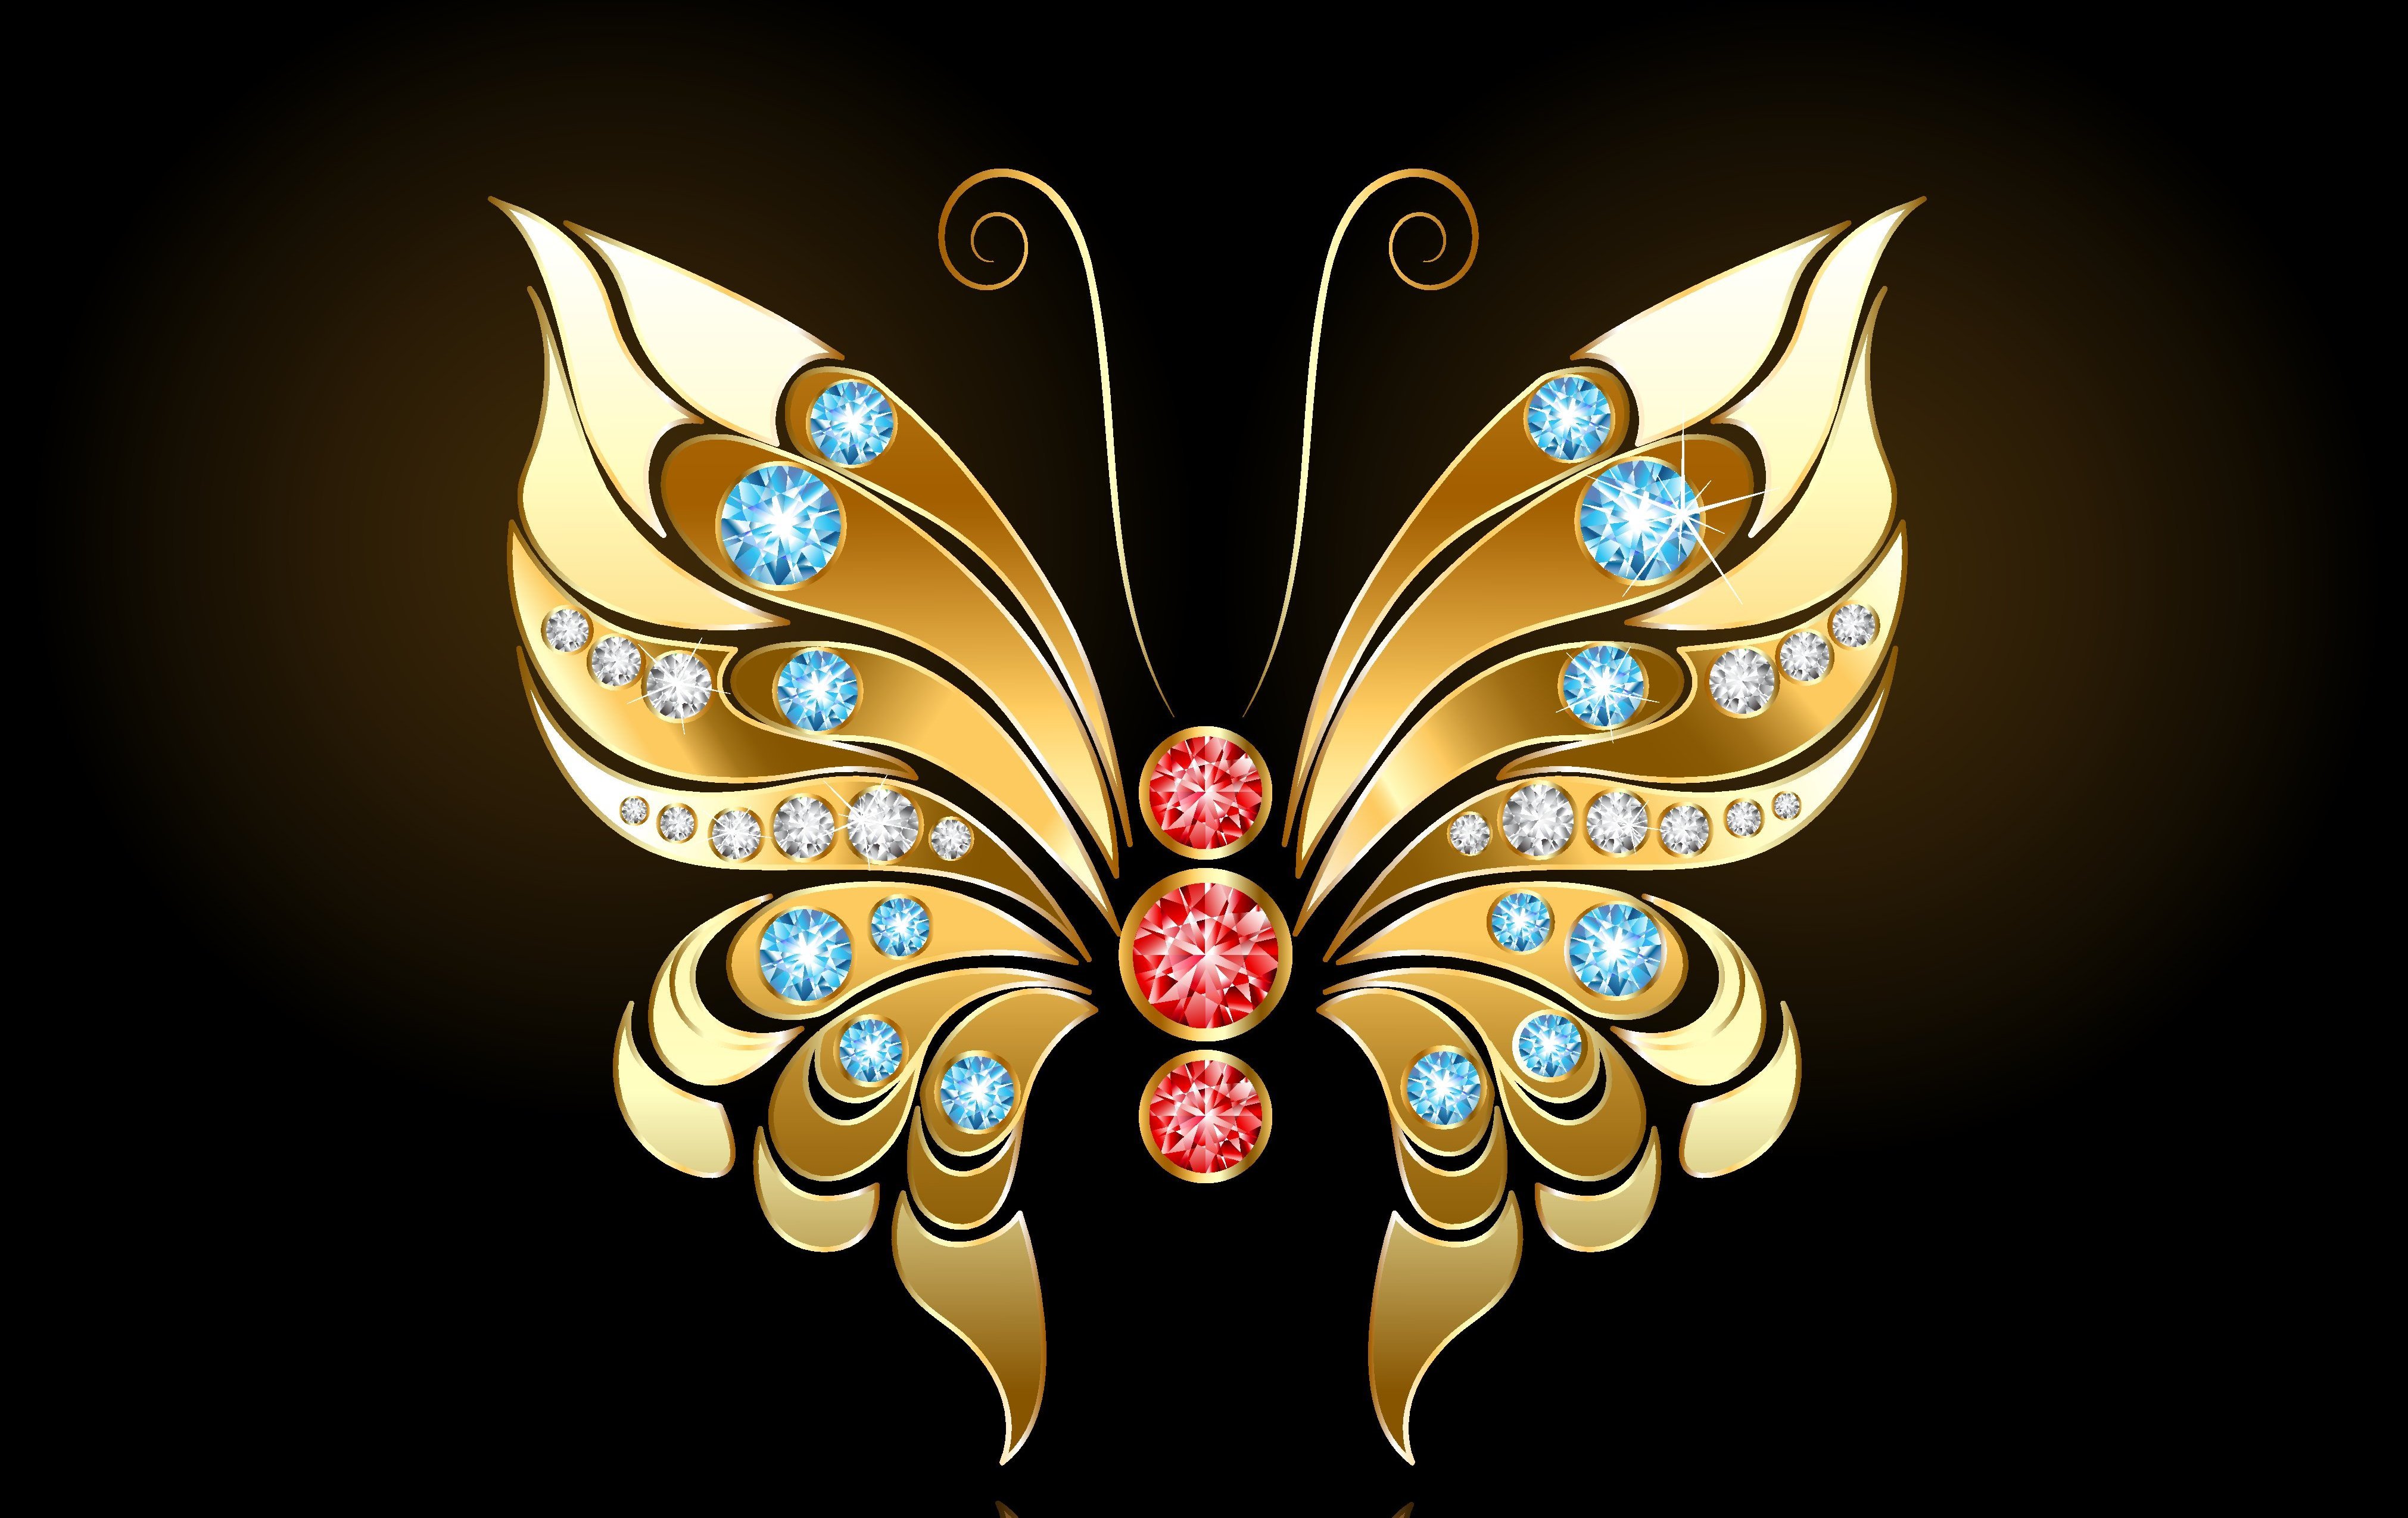 Golden Butterfly With Blue, White, And Red - Blue Wallpaper Iphone Butterfly , HD Wallpaper & Backgrounds